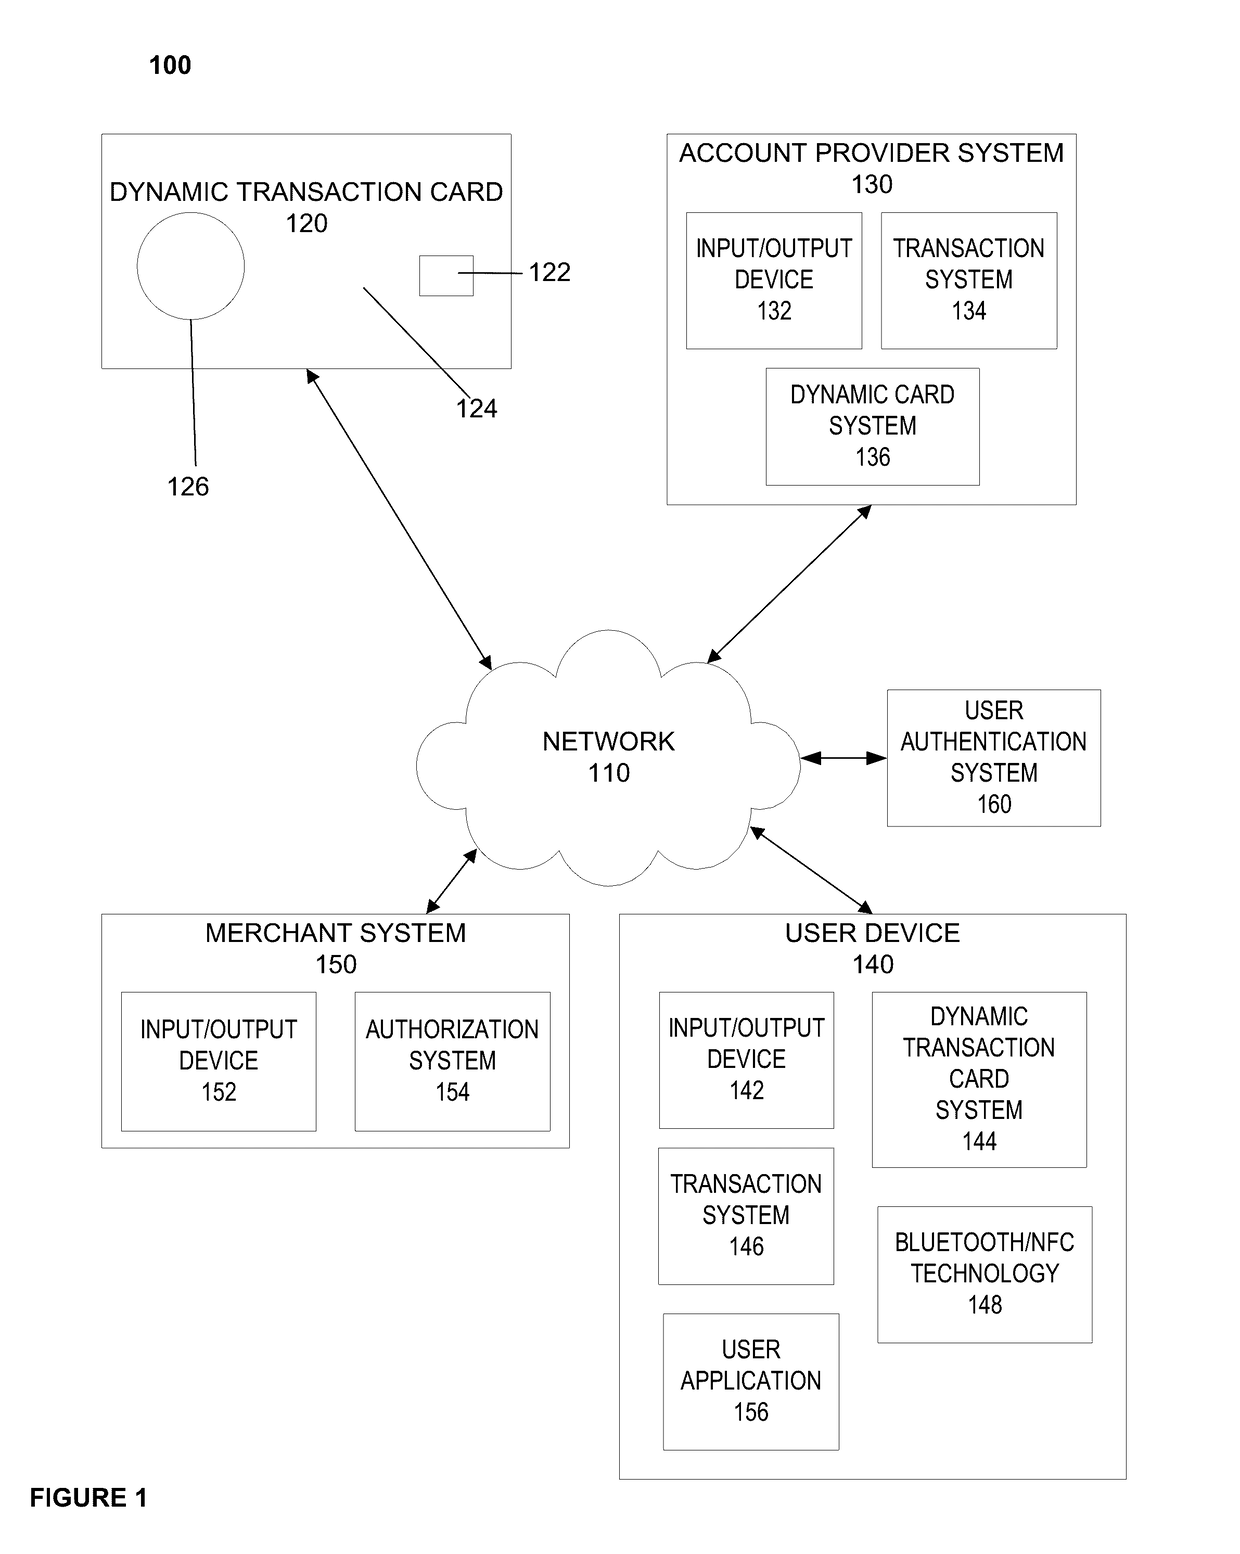 Dynamic transaction card protected by gesture and voice recognition